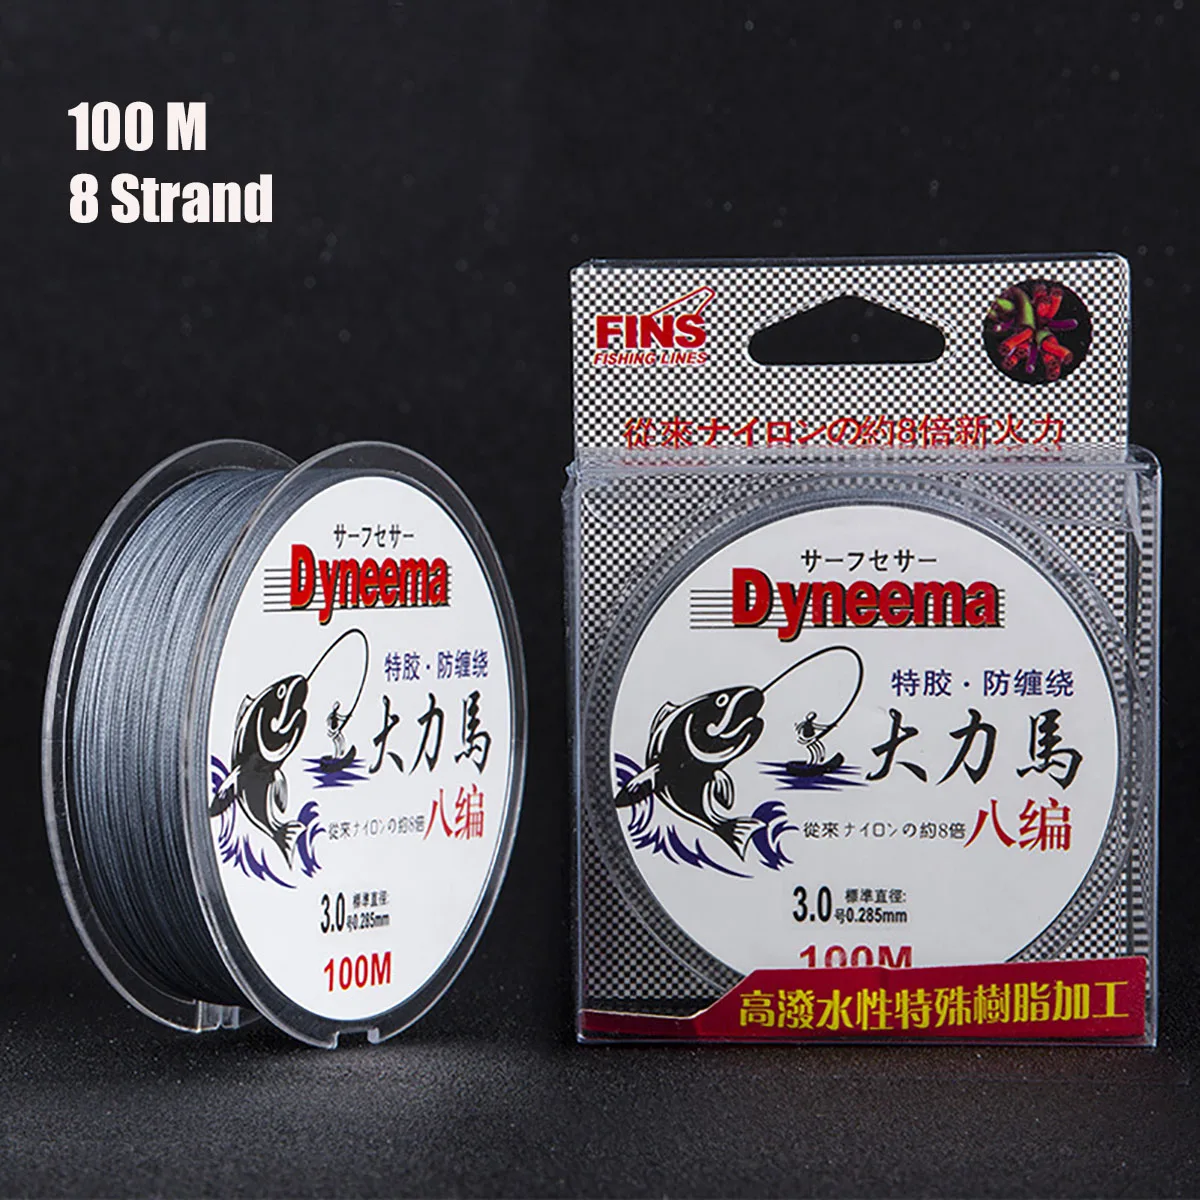 Super Power Braided Fishing Line - 8 Strands Abrasion Resistant Braided Lines, Zero Stretch,100% PE, 100M